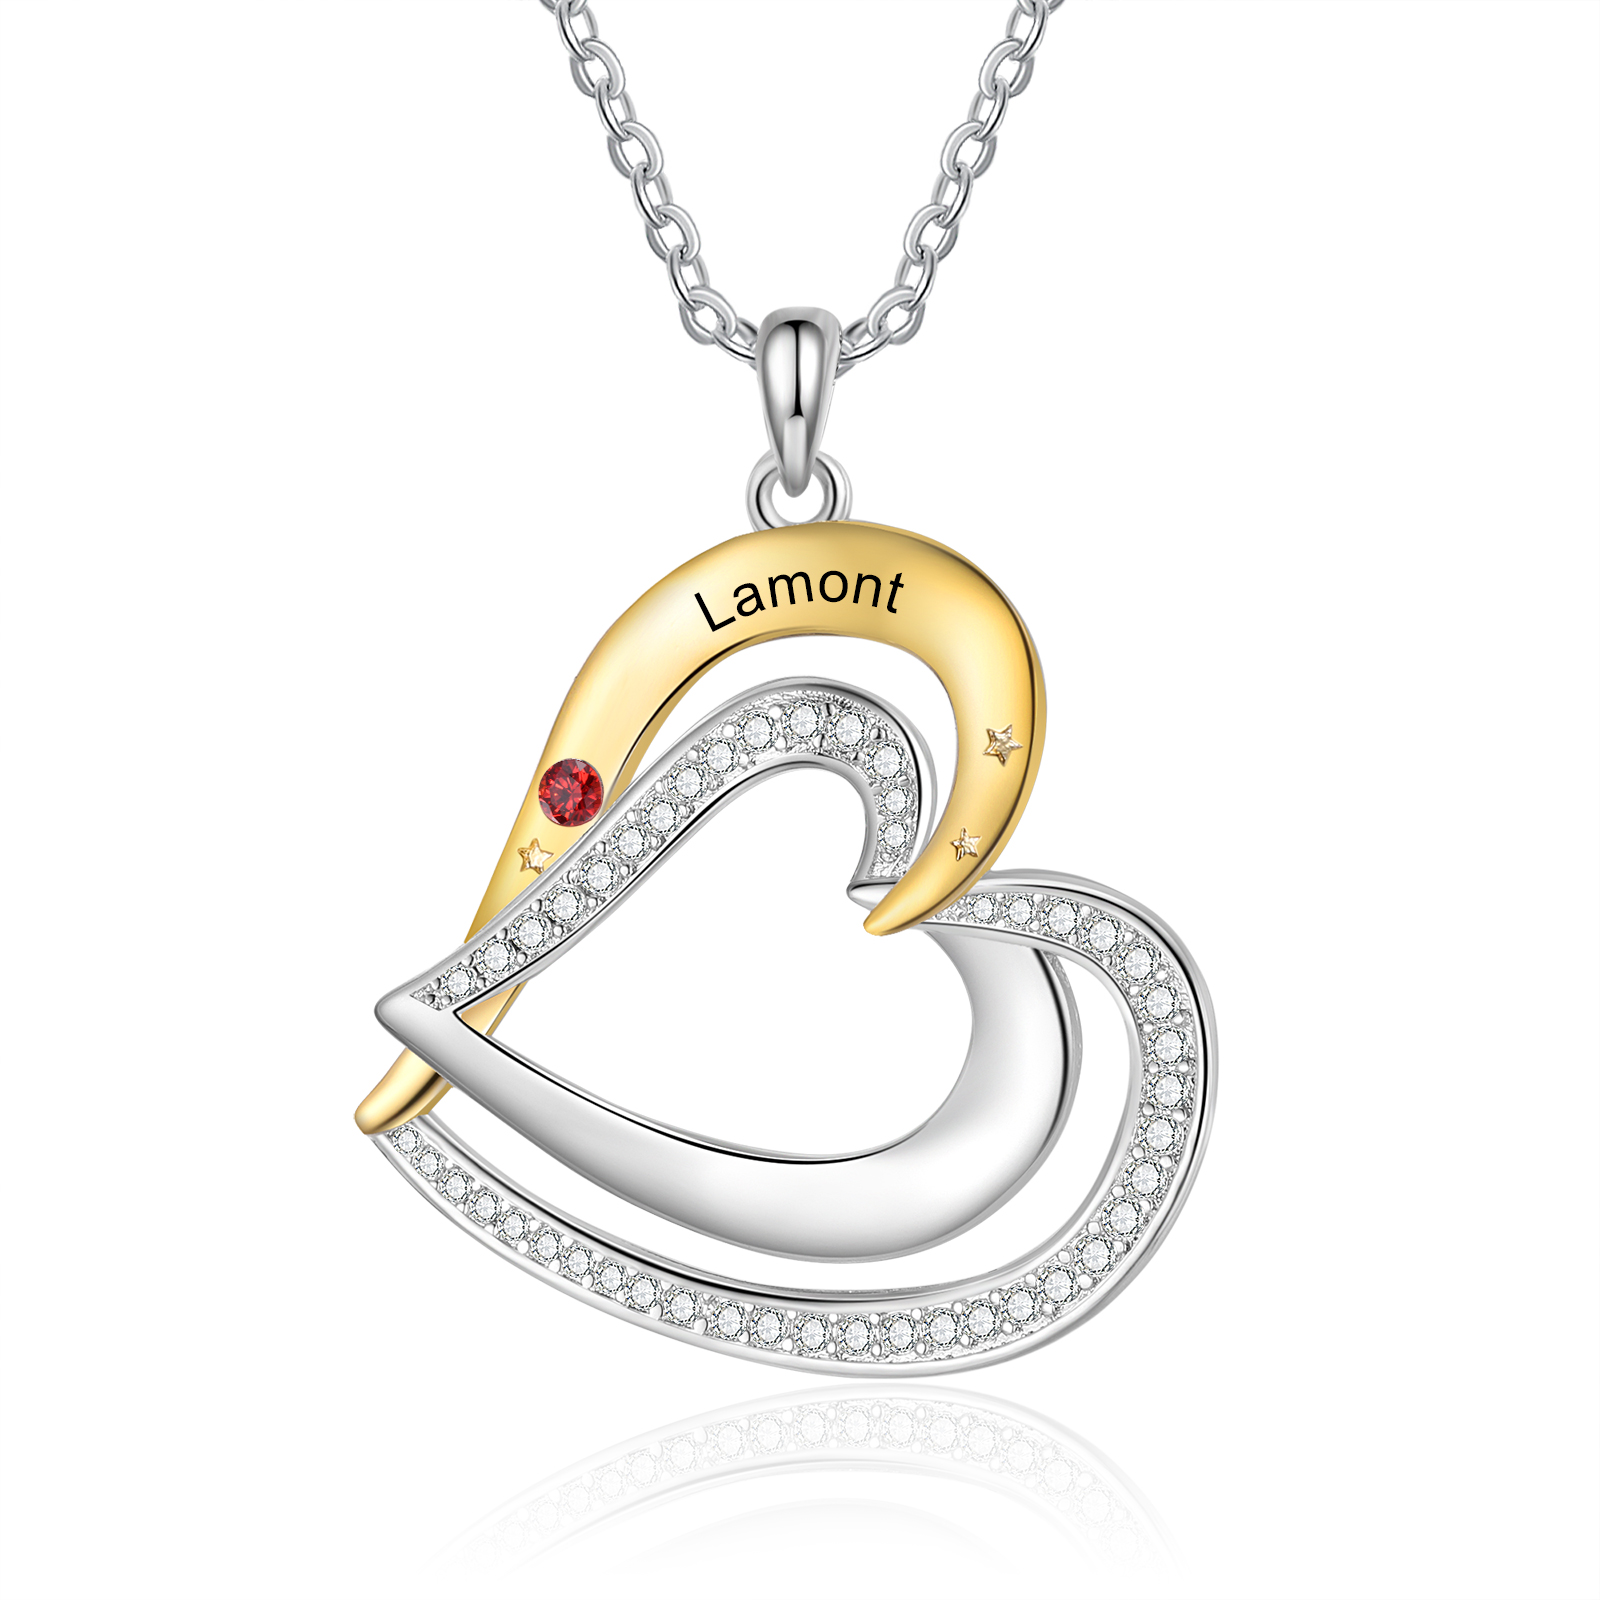 1 Name - Personalized Love Necklace with Customized Name and Birthston